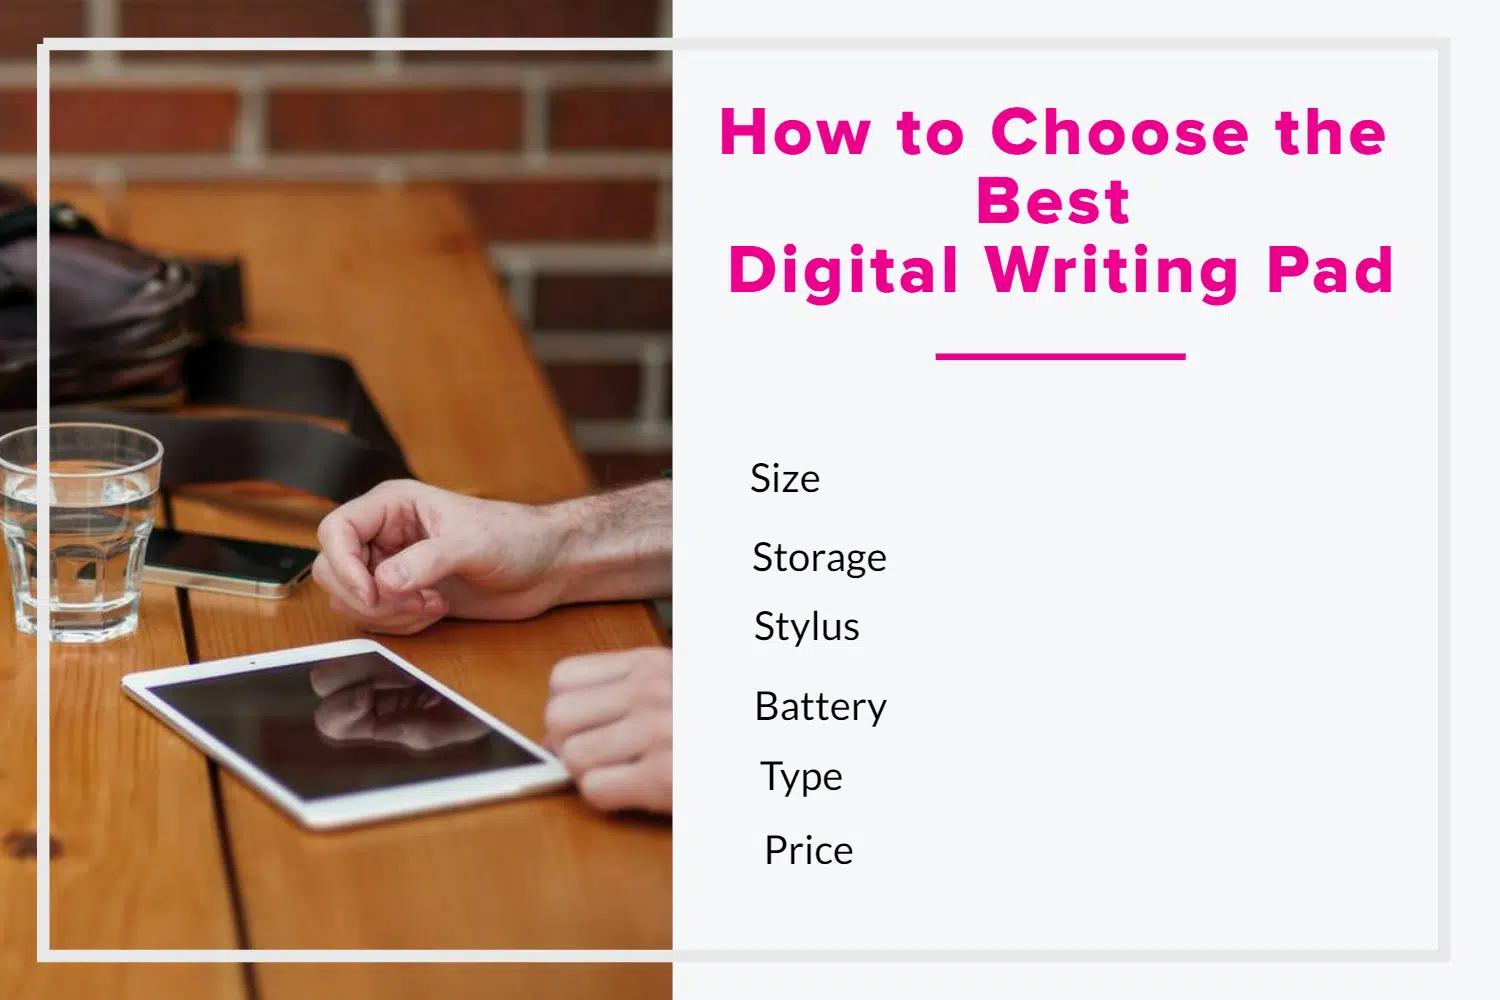 How to Choose the Best Digital Writing Pad